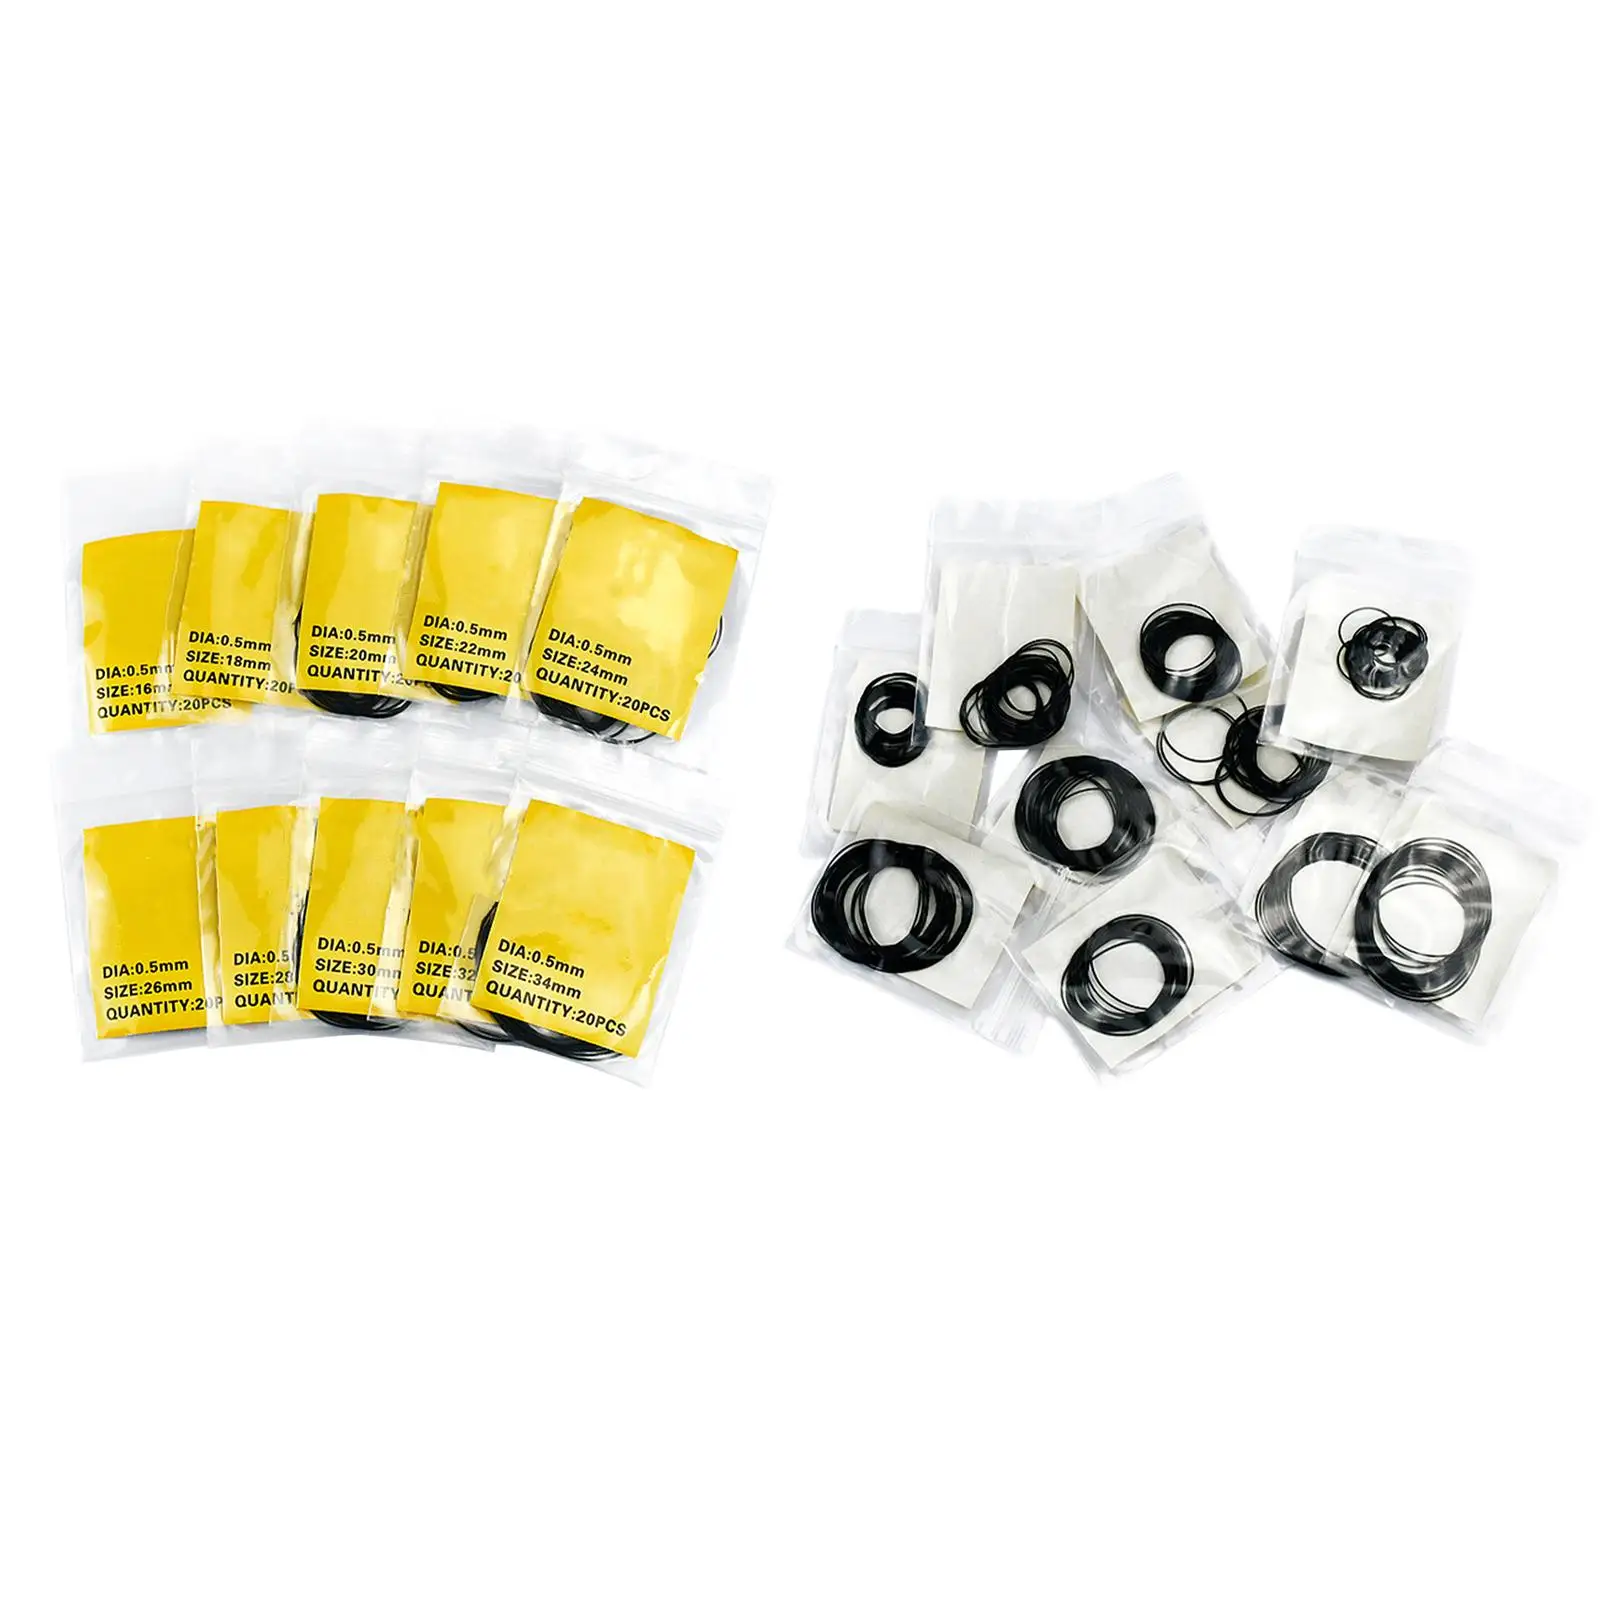 200x Watch Back Case Gasket Jewelers 10 Sizes Assortment Water Resistant 16mm-34mm Watch Supplies Seal Washers Seal Gaskets